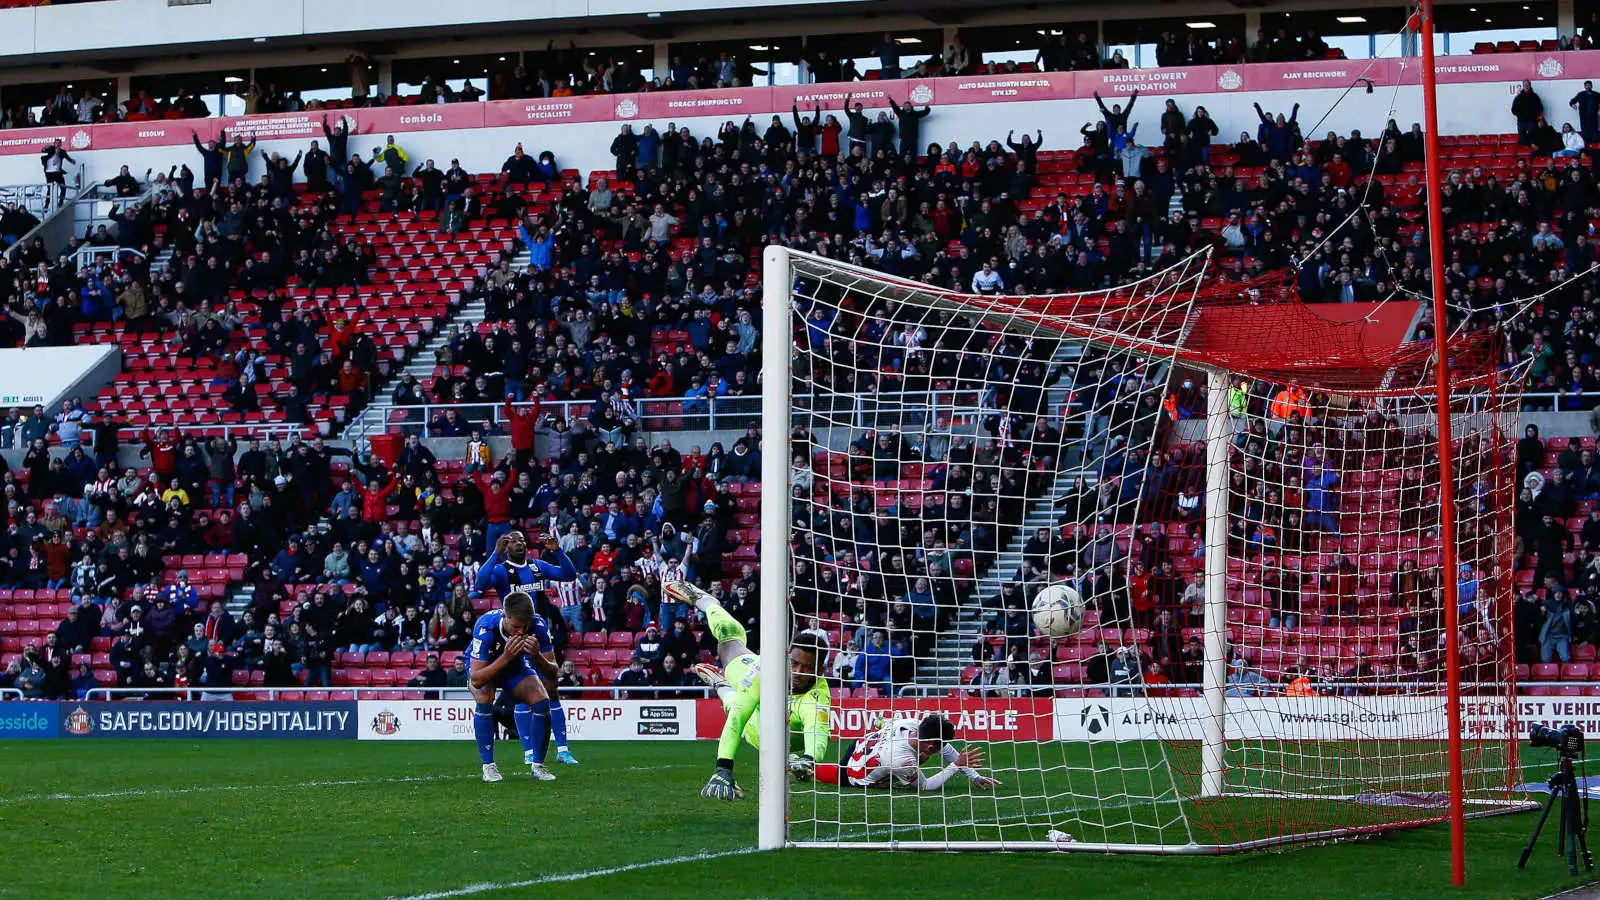 Sunderland score against Gillingham in their League One match